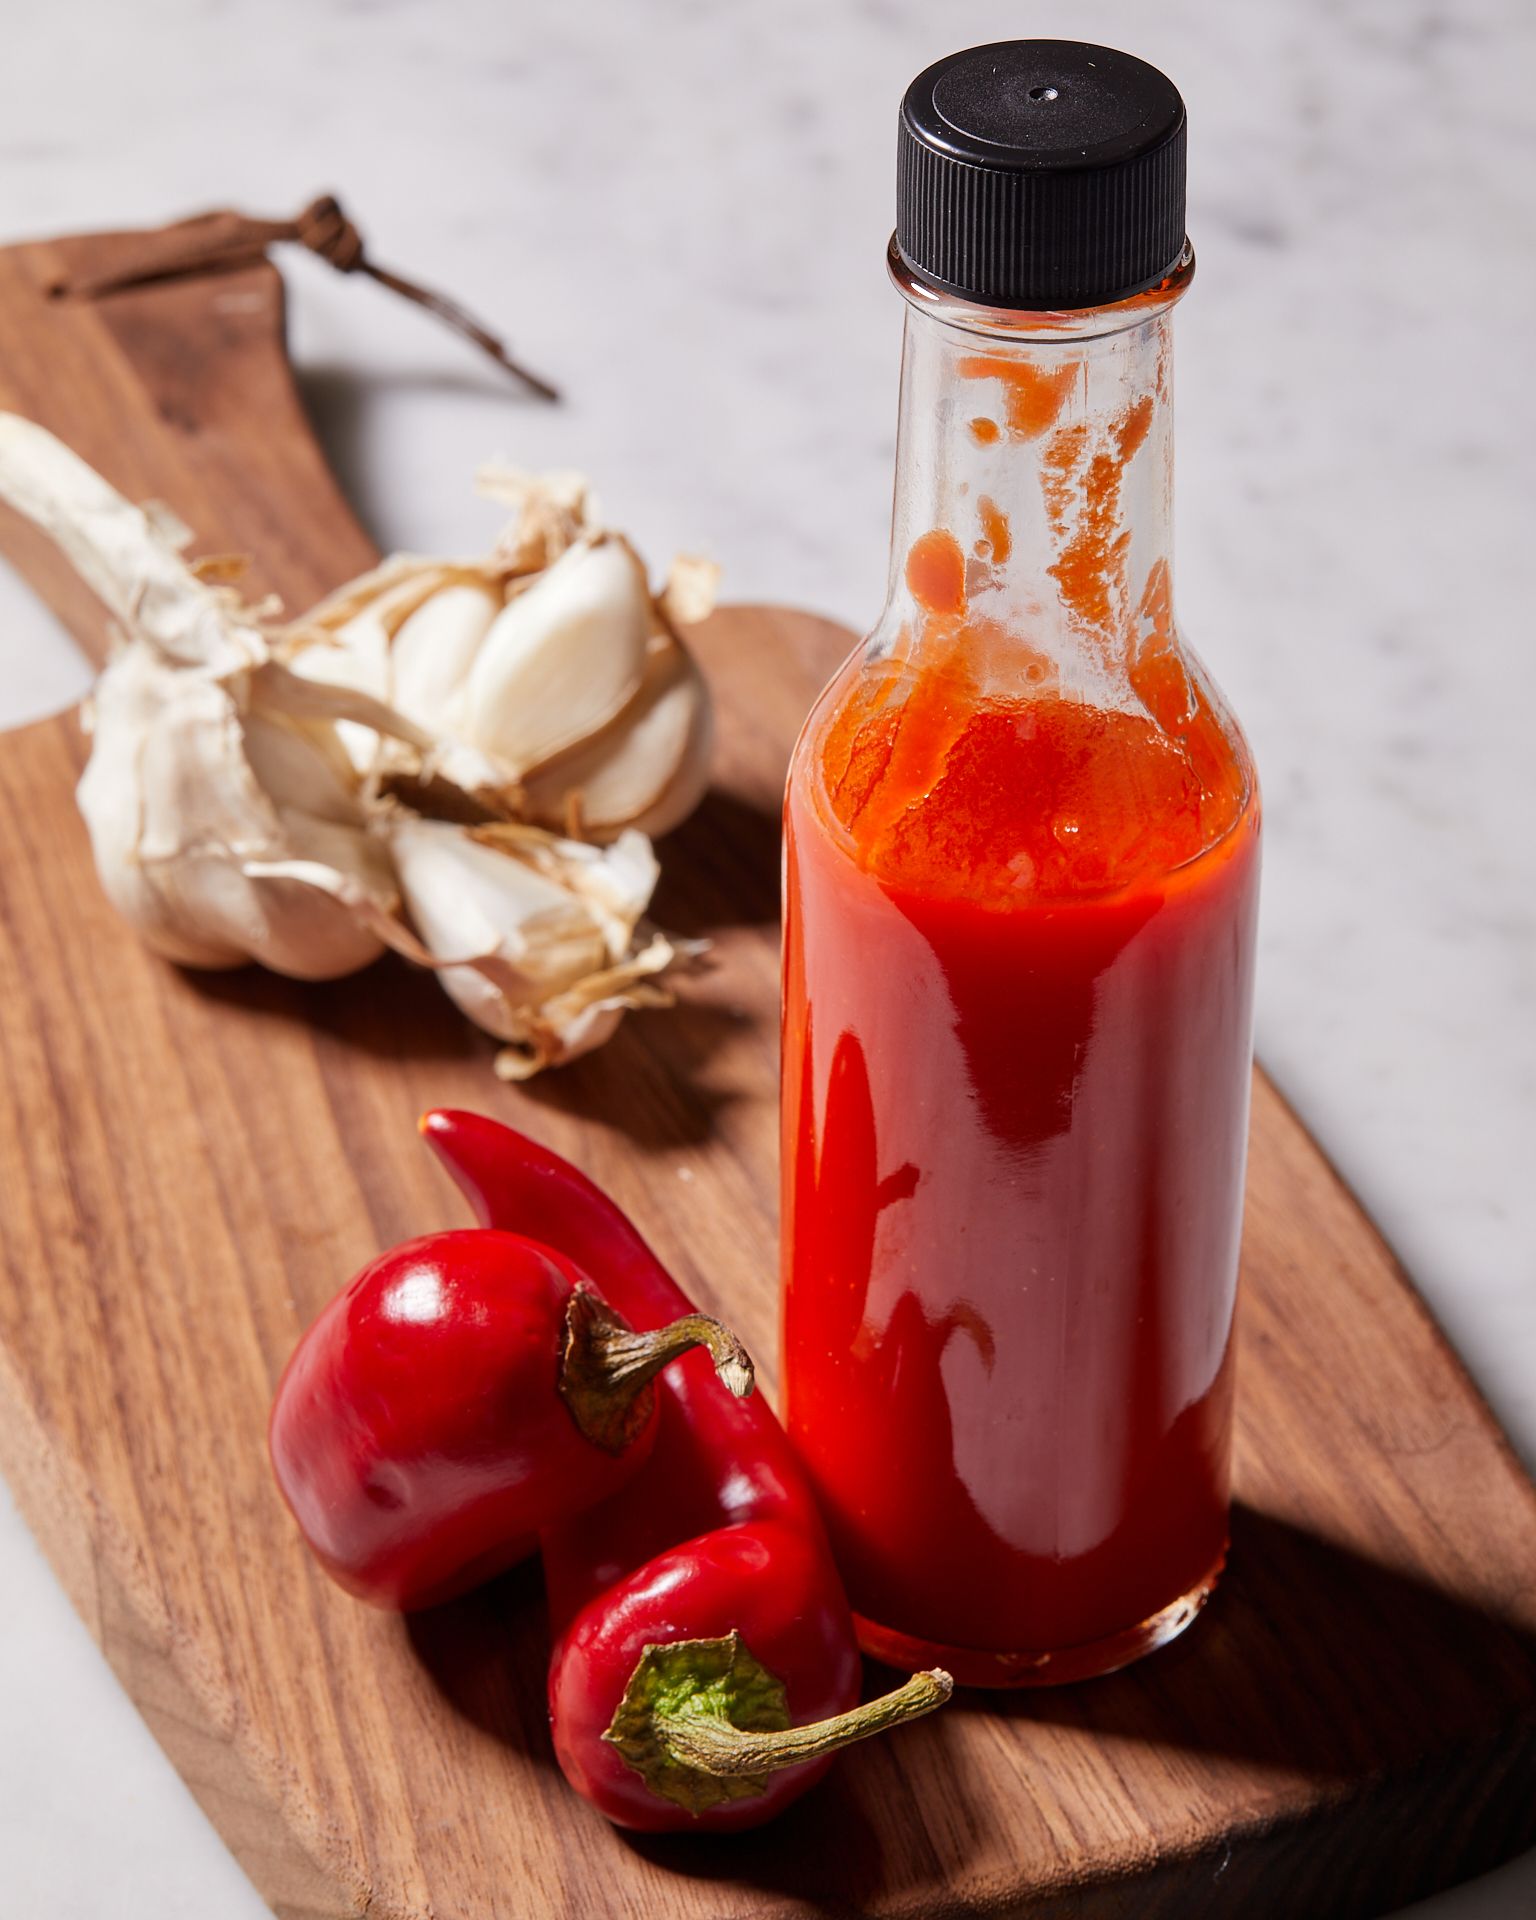 How to Make Fermented Hot Sauce At Home